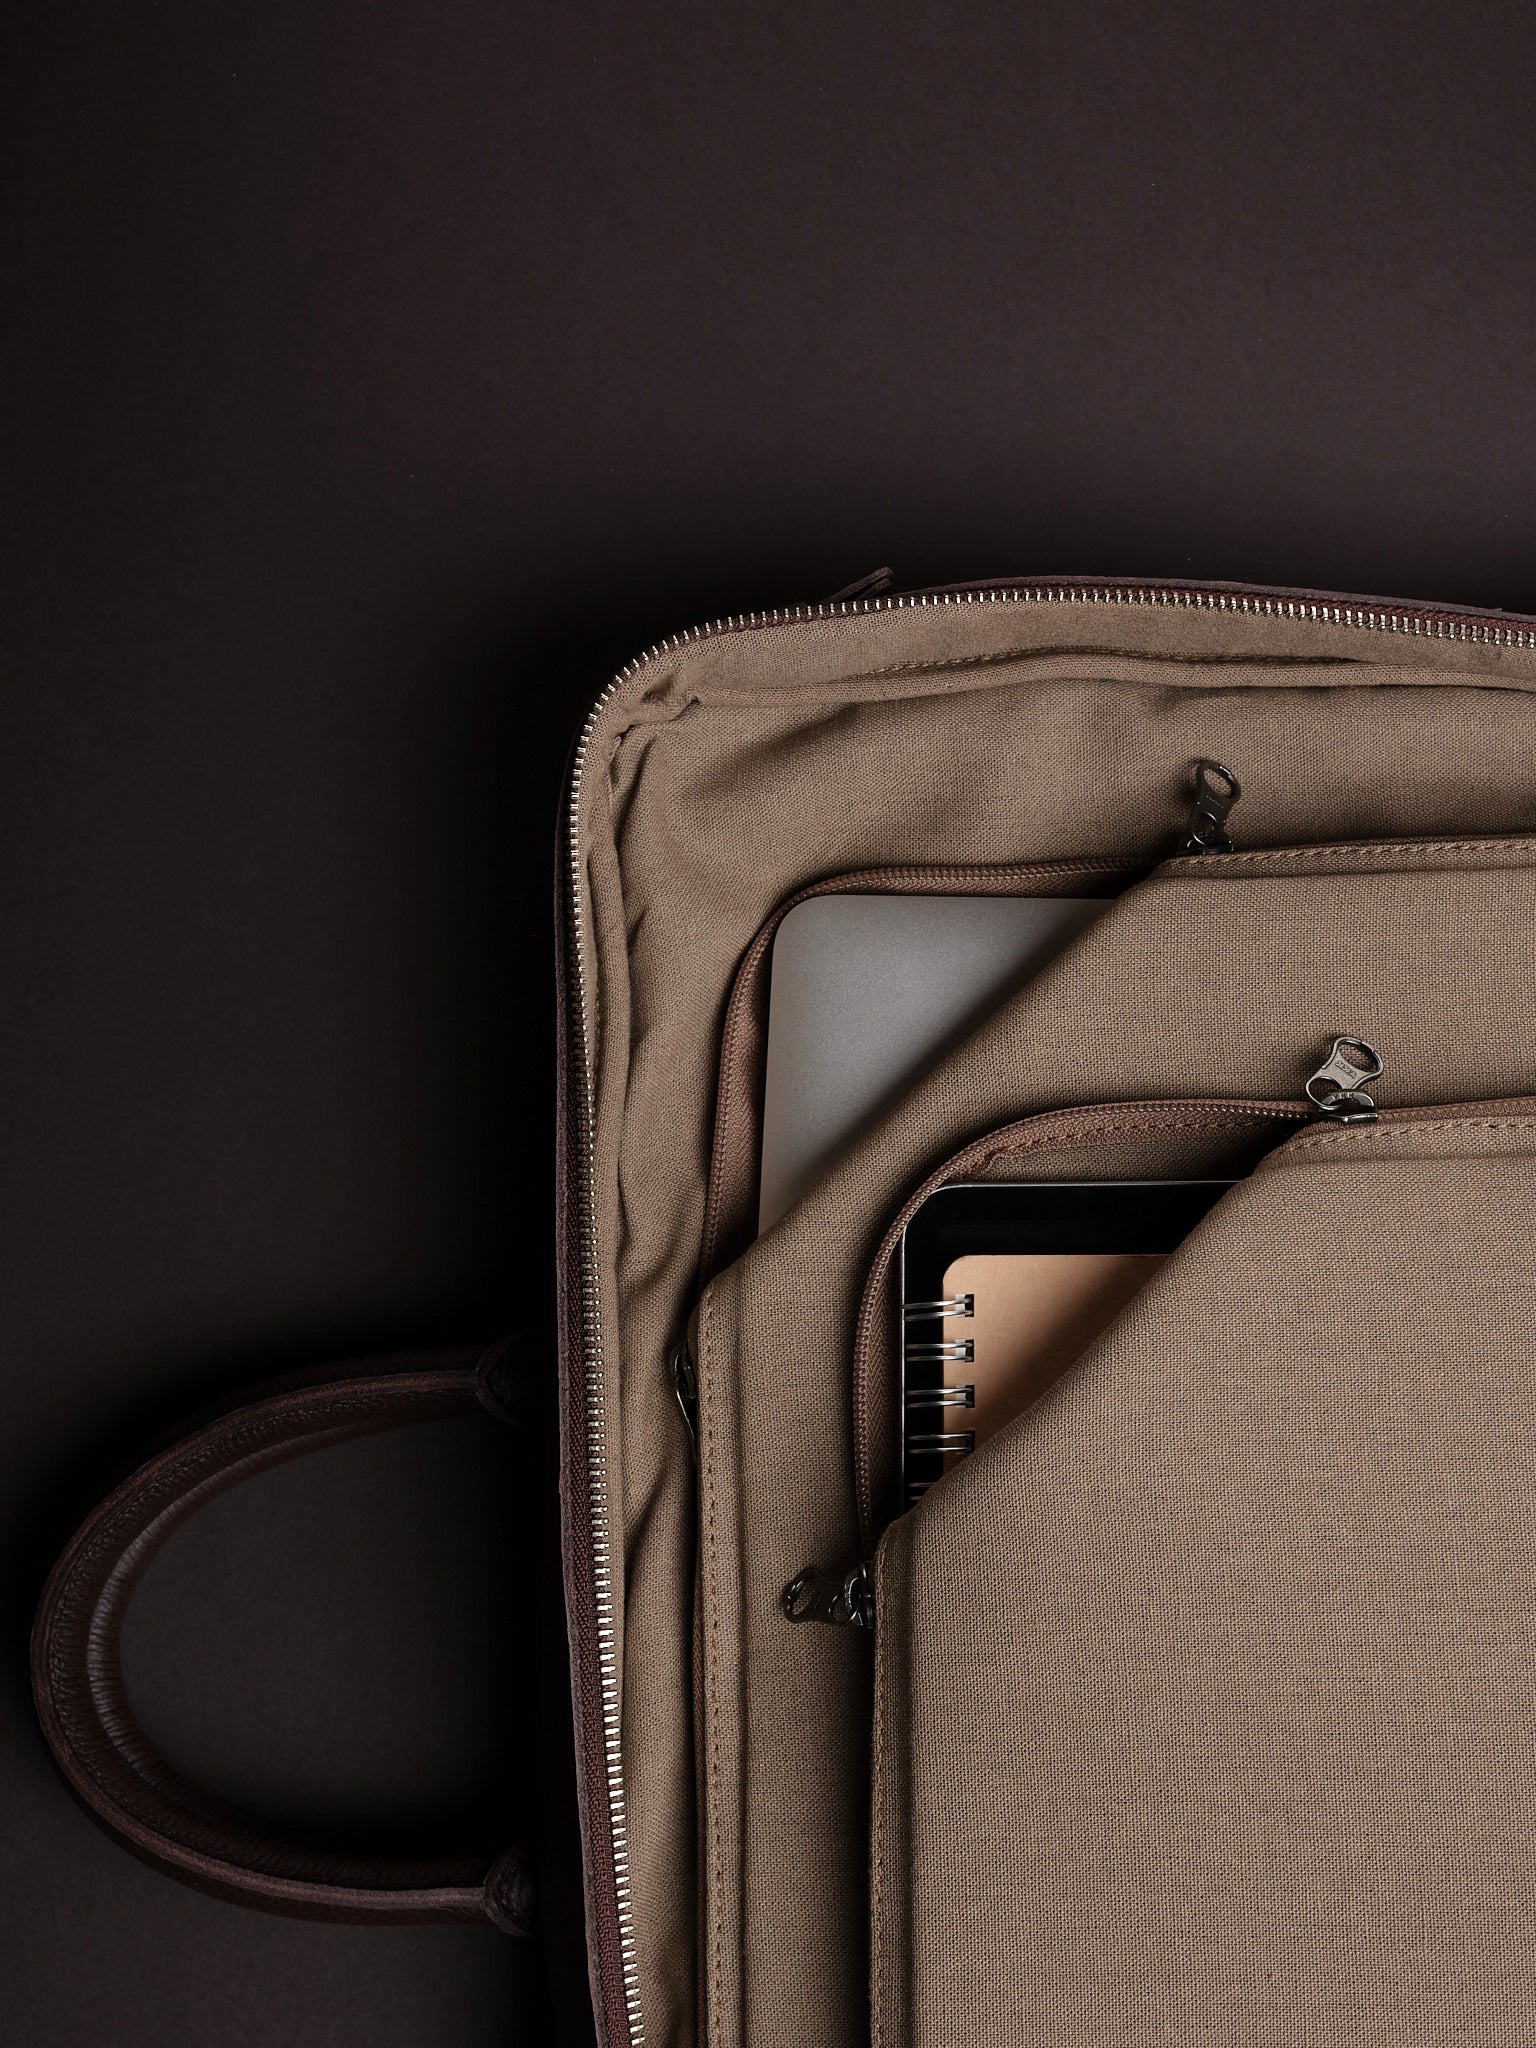 Laptop and Tablet Compartments. Business Briefcase. From Backpack to Briefcase Dark Brown by Capra Leather